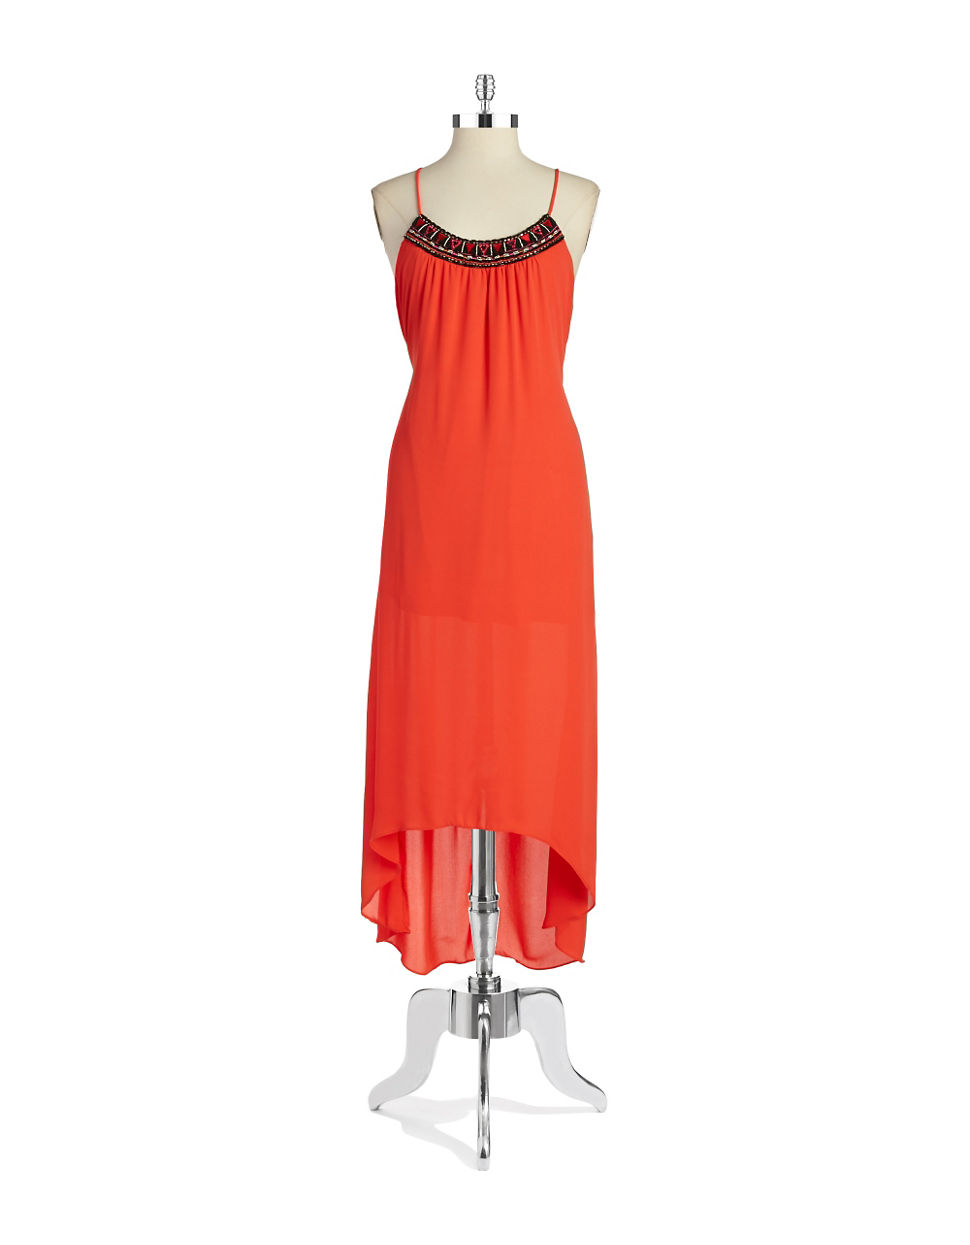 lord and taylor michael kors dresses